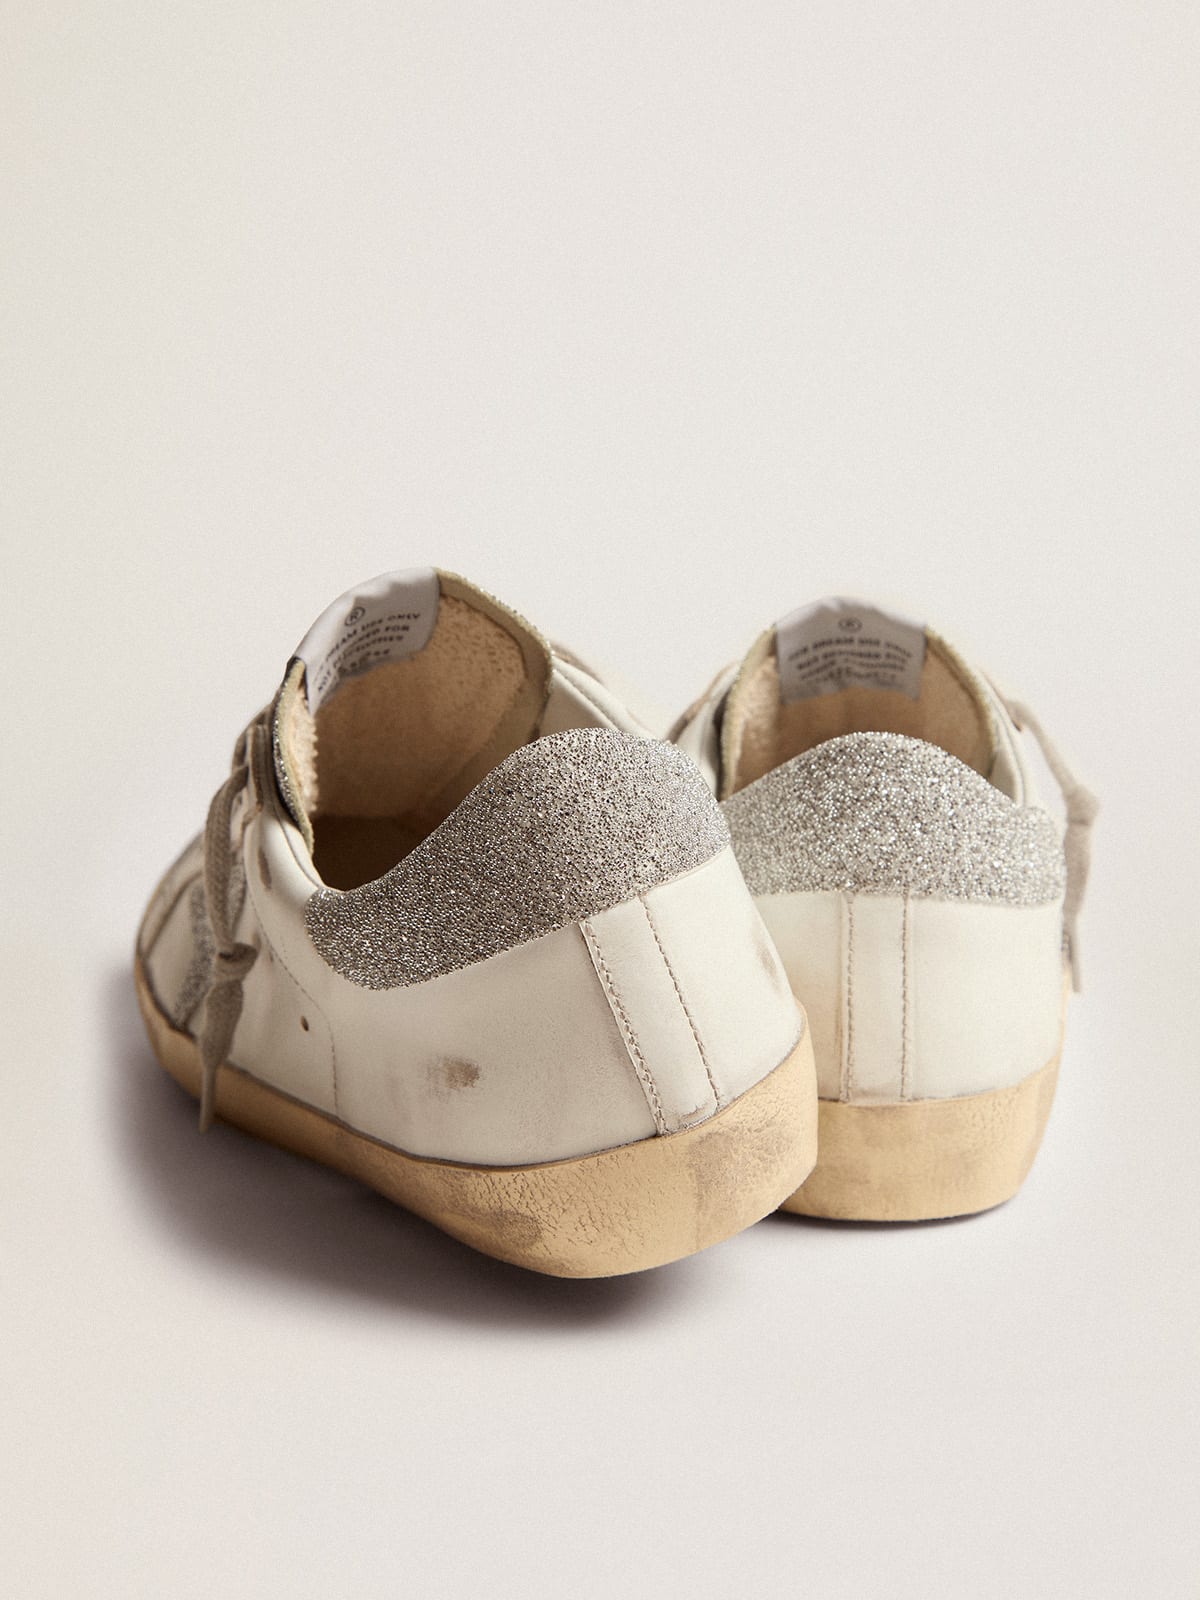 Golden Goose - Women's Super-Star with white leather upper and Swarovski inserts in 